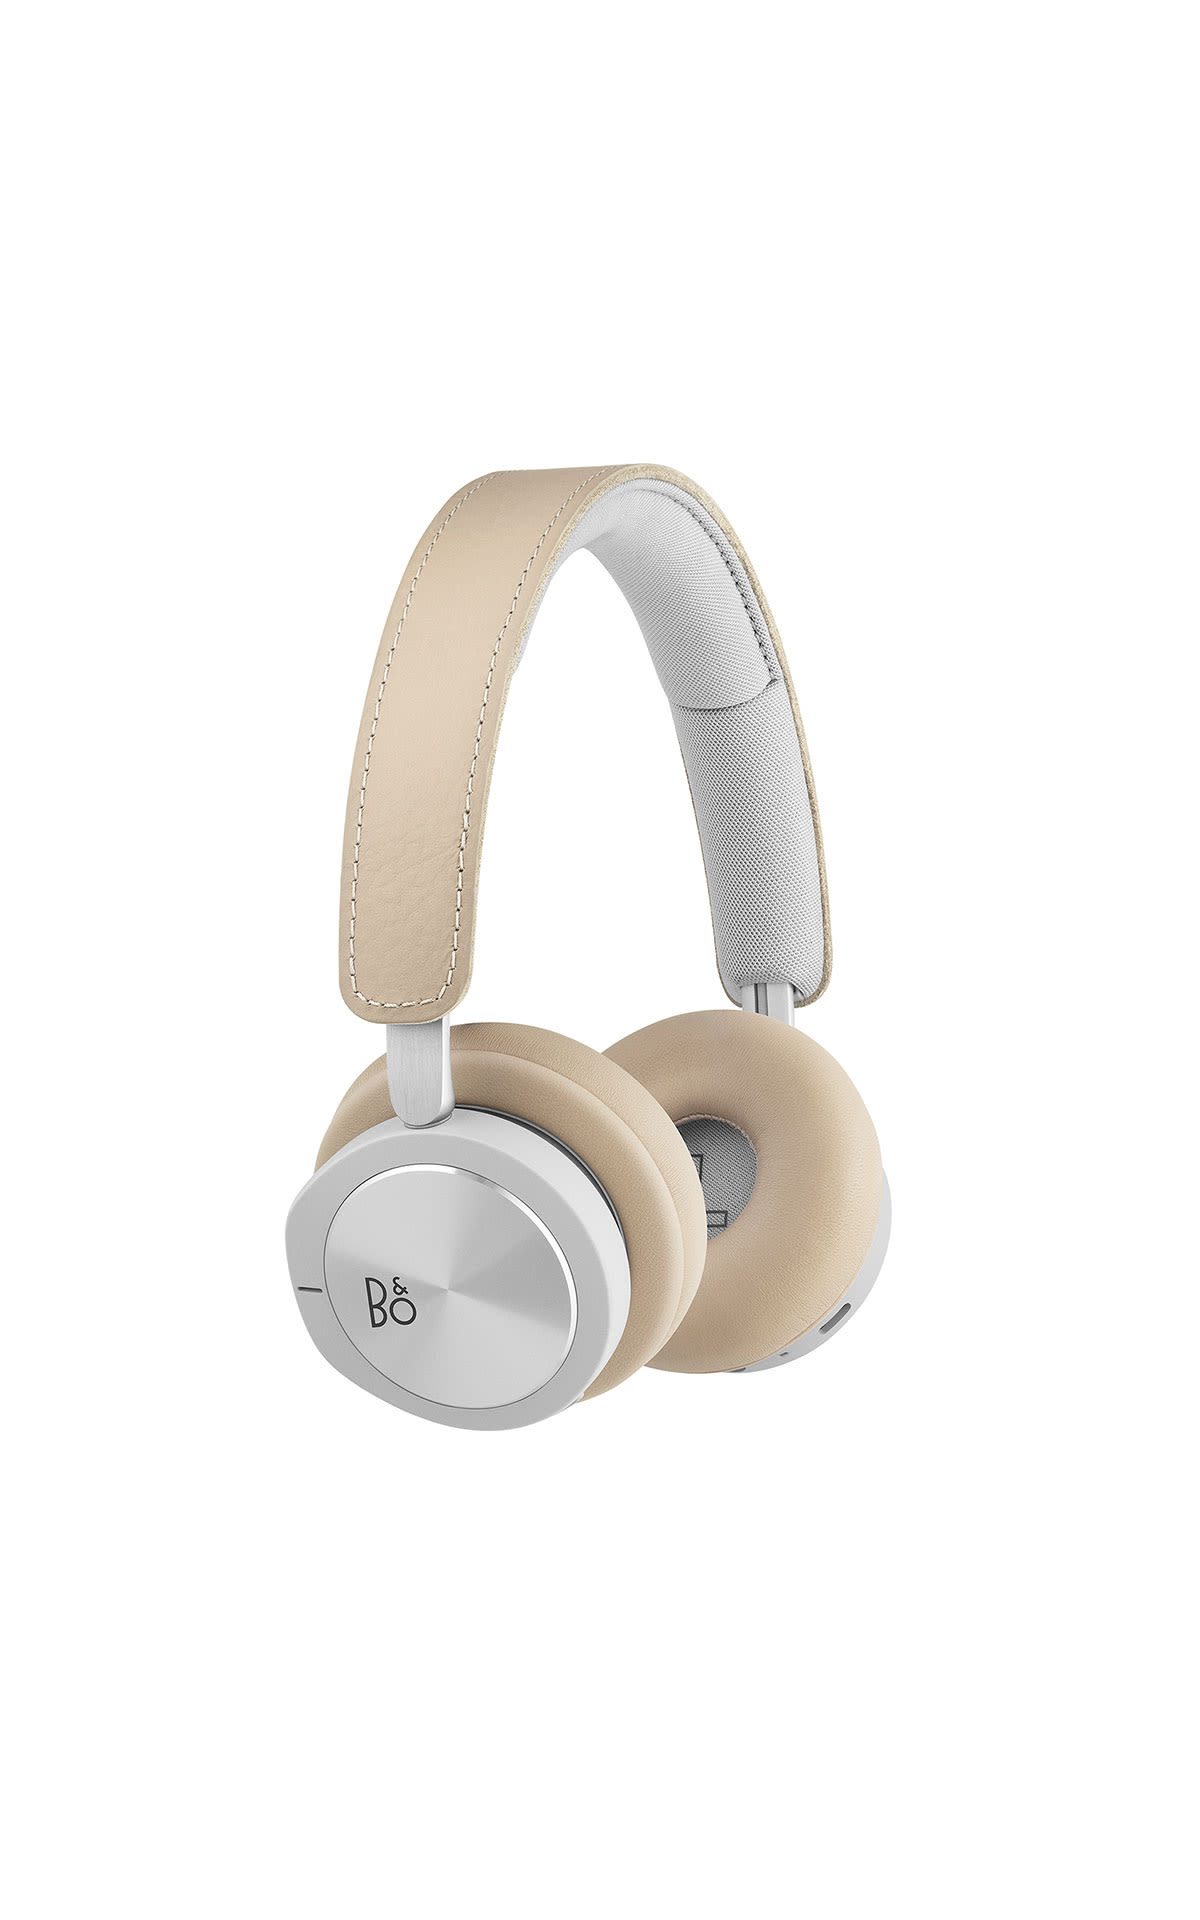 Bang & Olufsen Beoplay H8i natural from Bicester Village